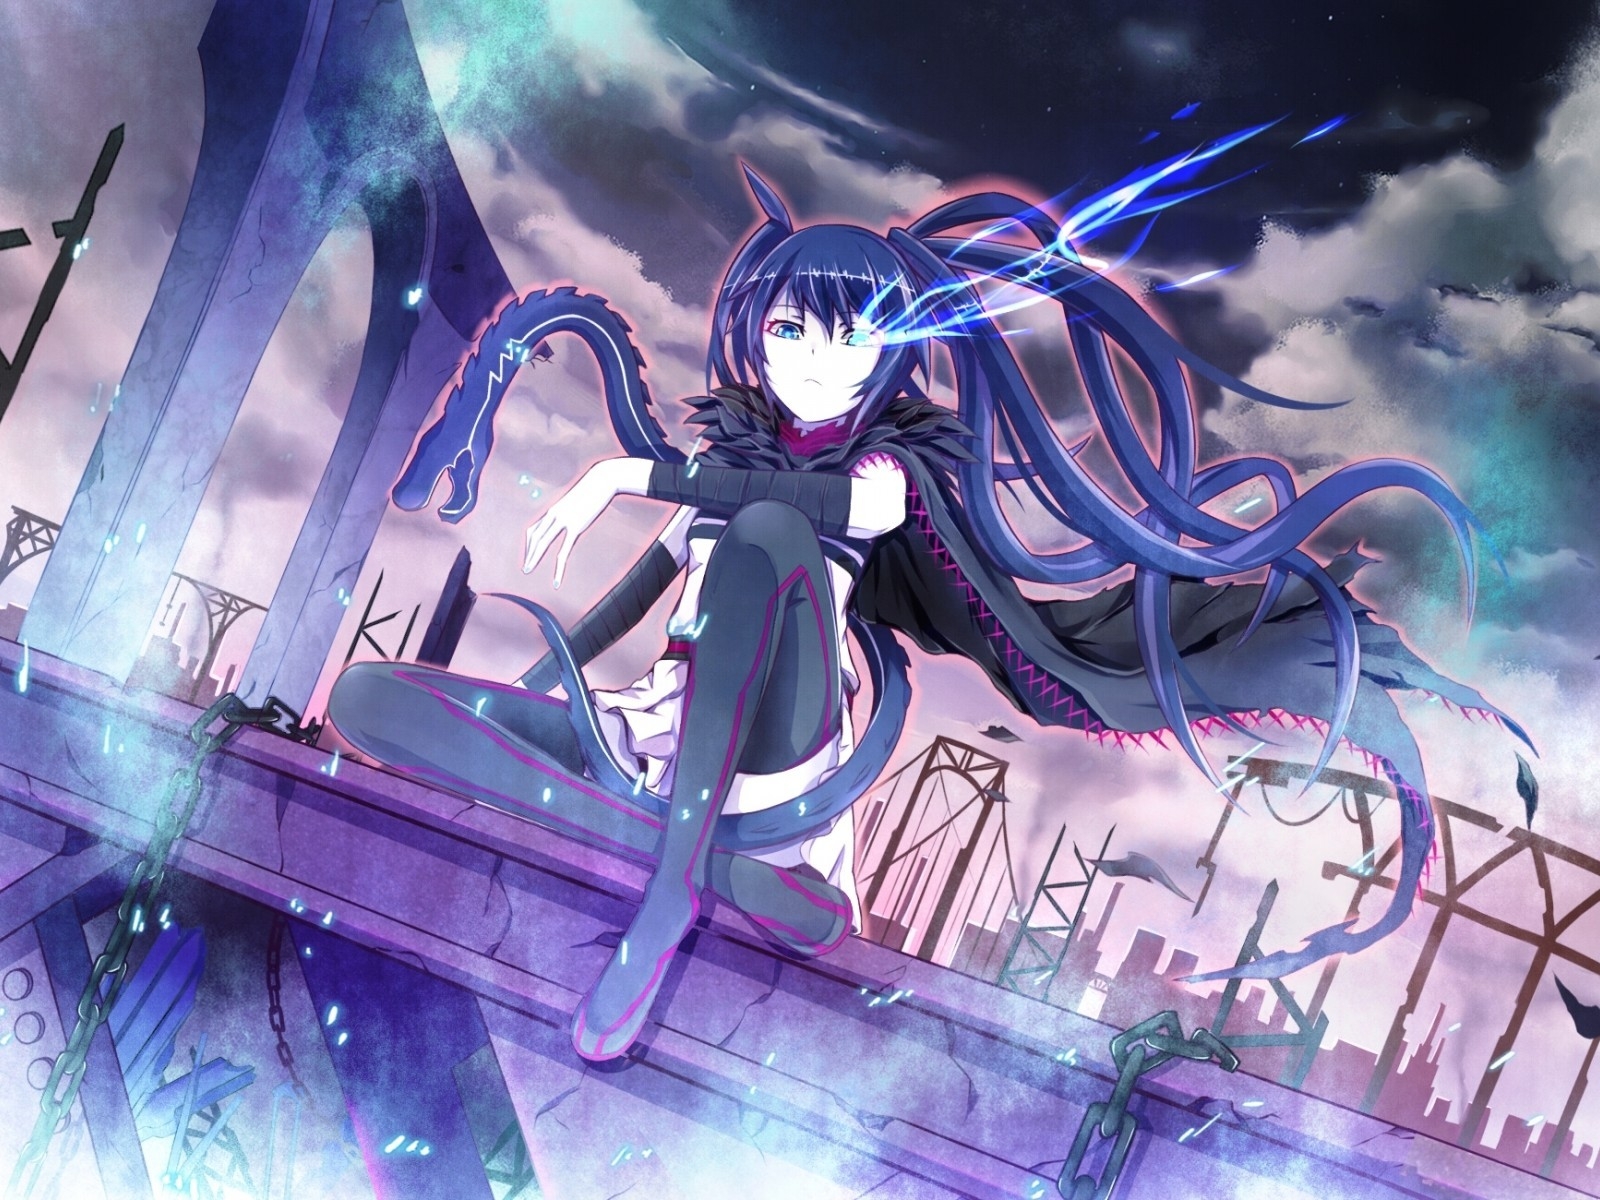 Black Rock Shooter Blue Eye Flame for 1600 x 1200 resolution